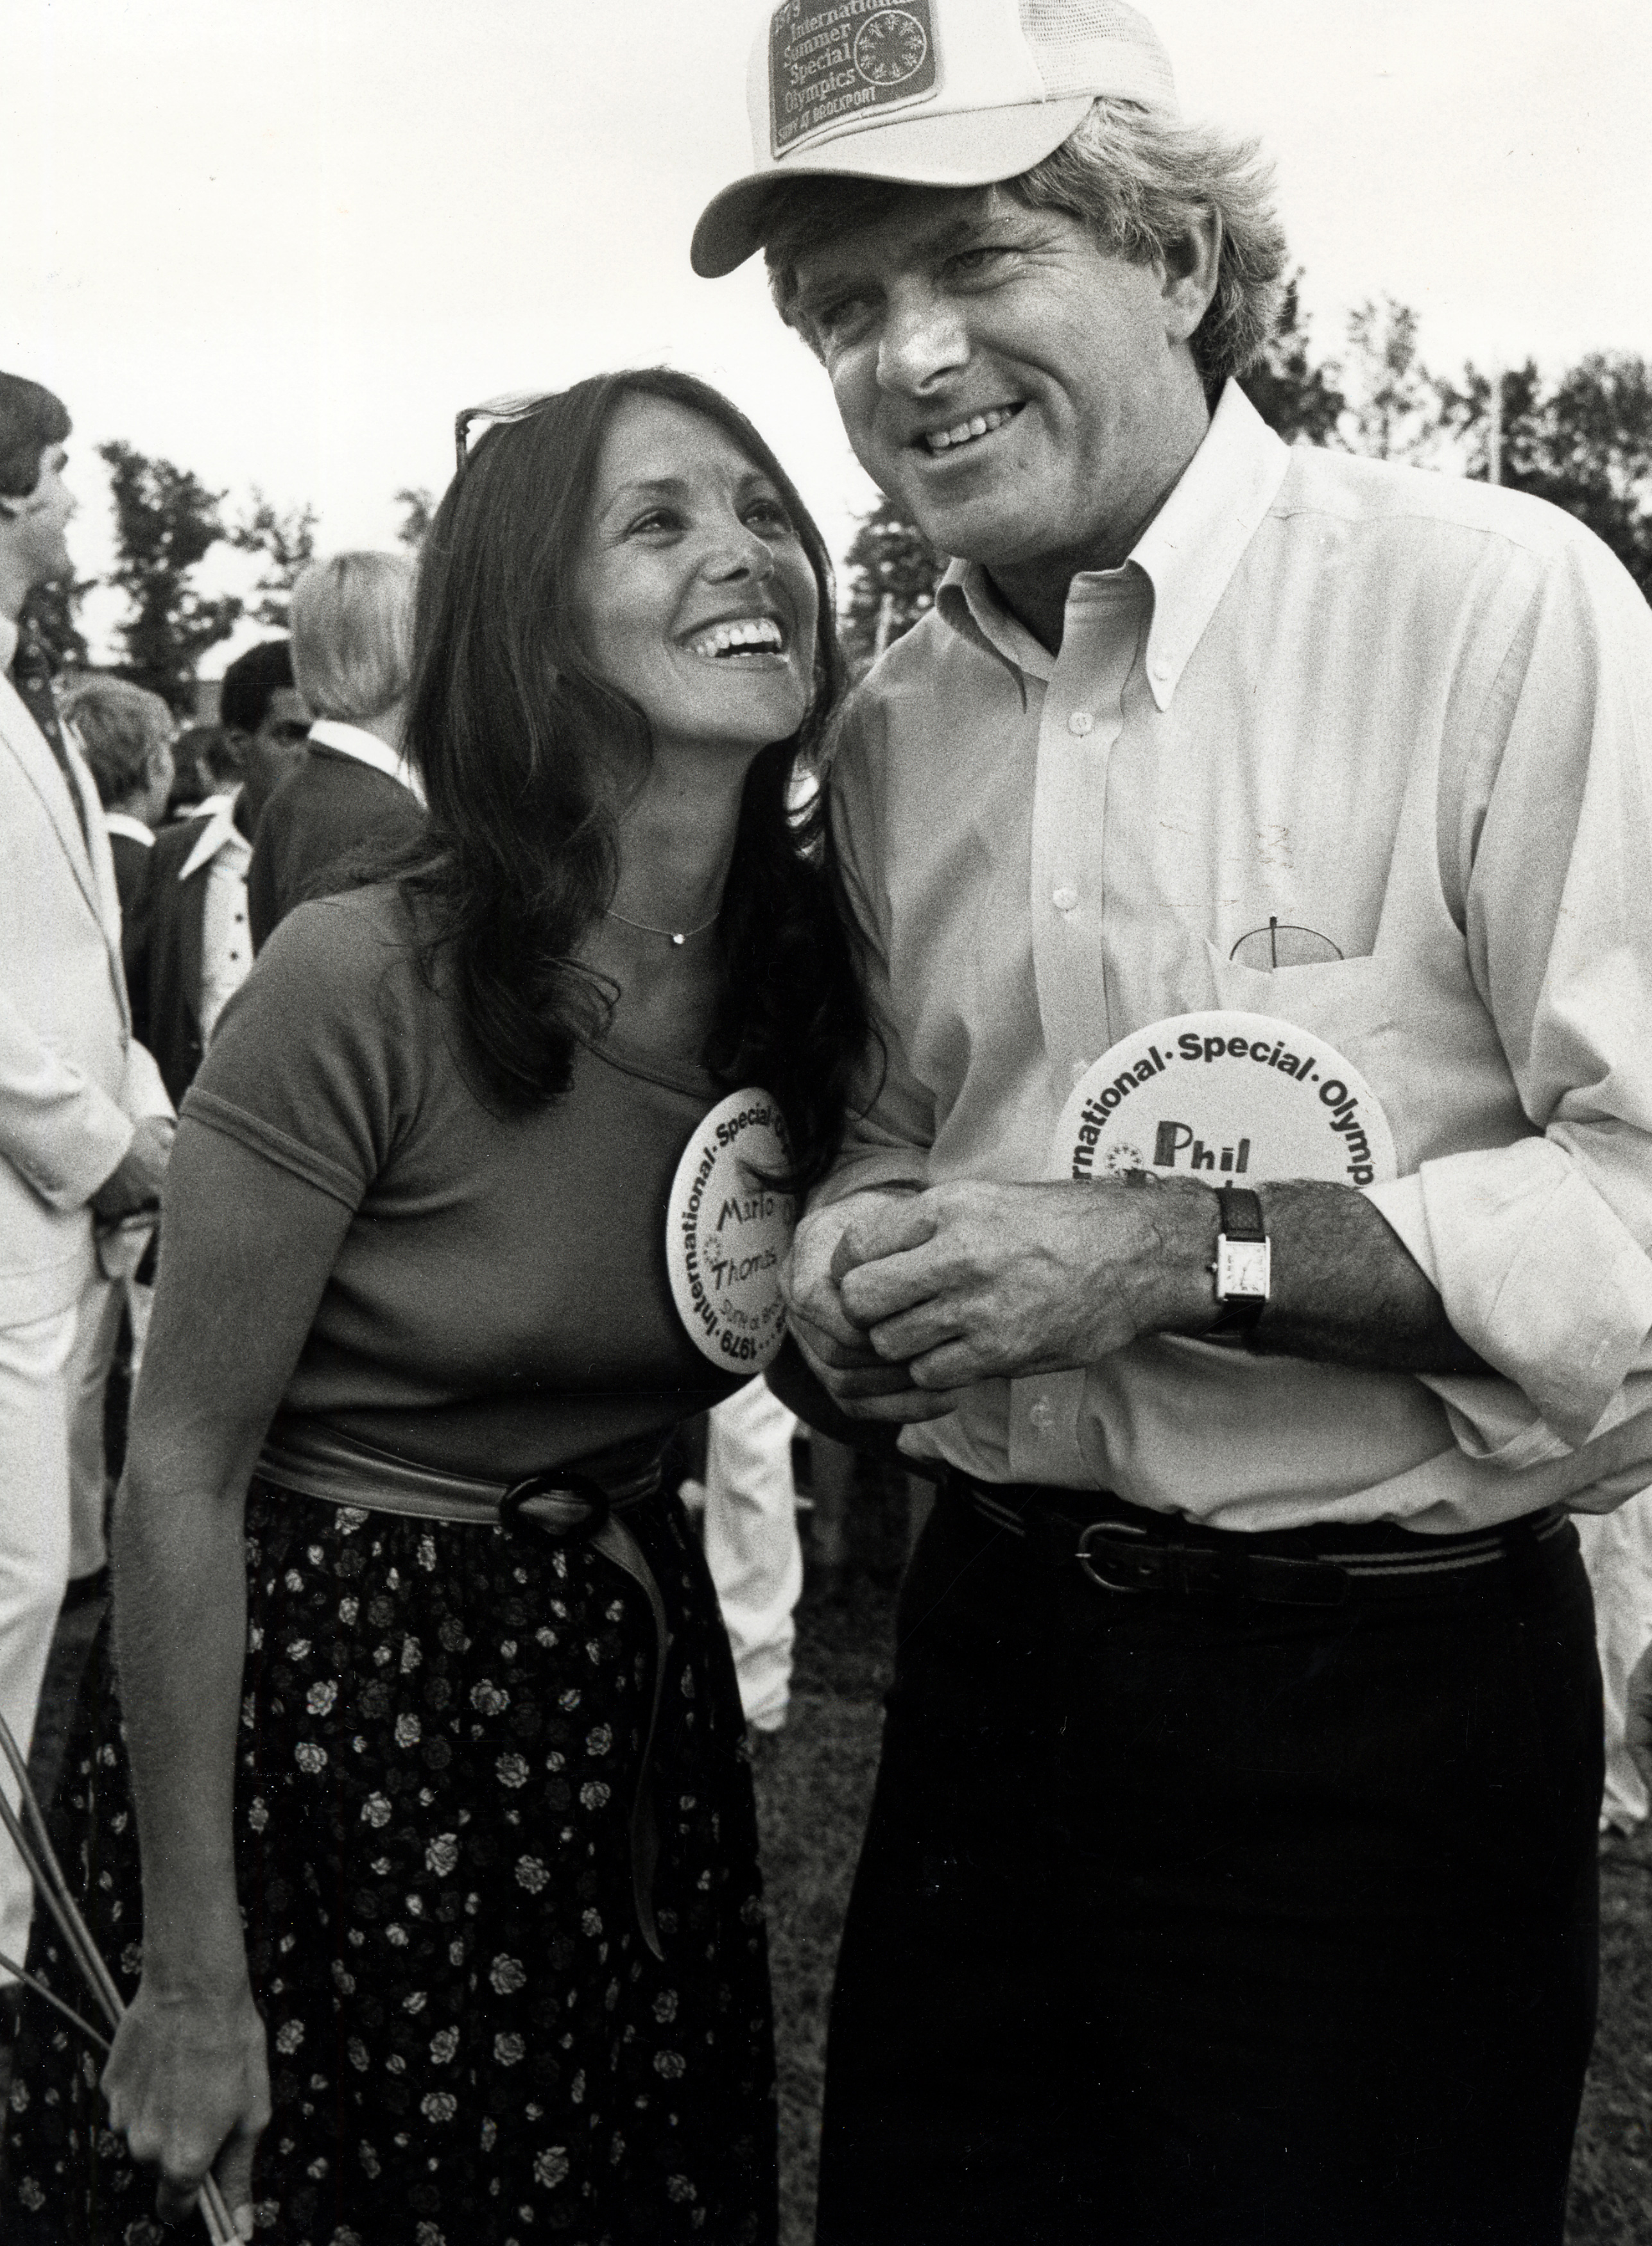 Marlo Thomas and Phil Donahue in Brockport, New York in 1979 | Source: Getty Images